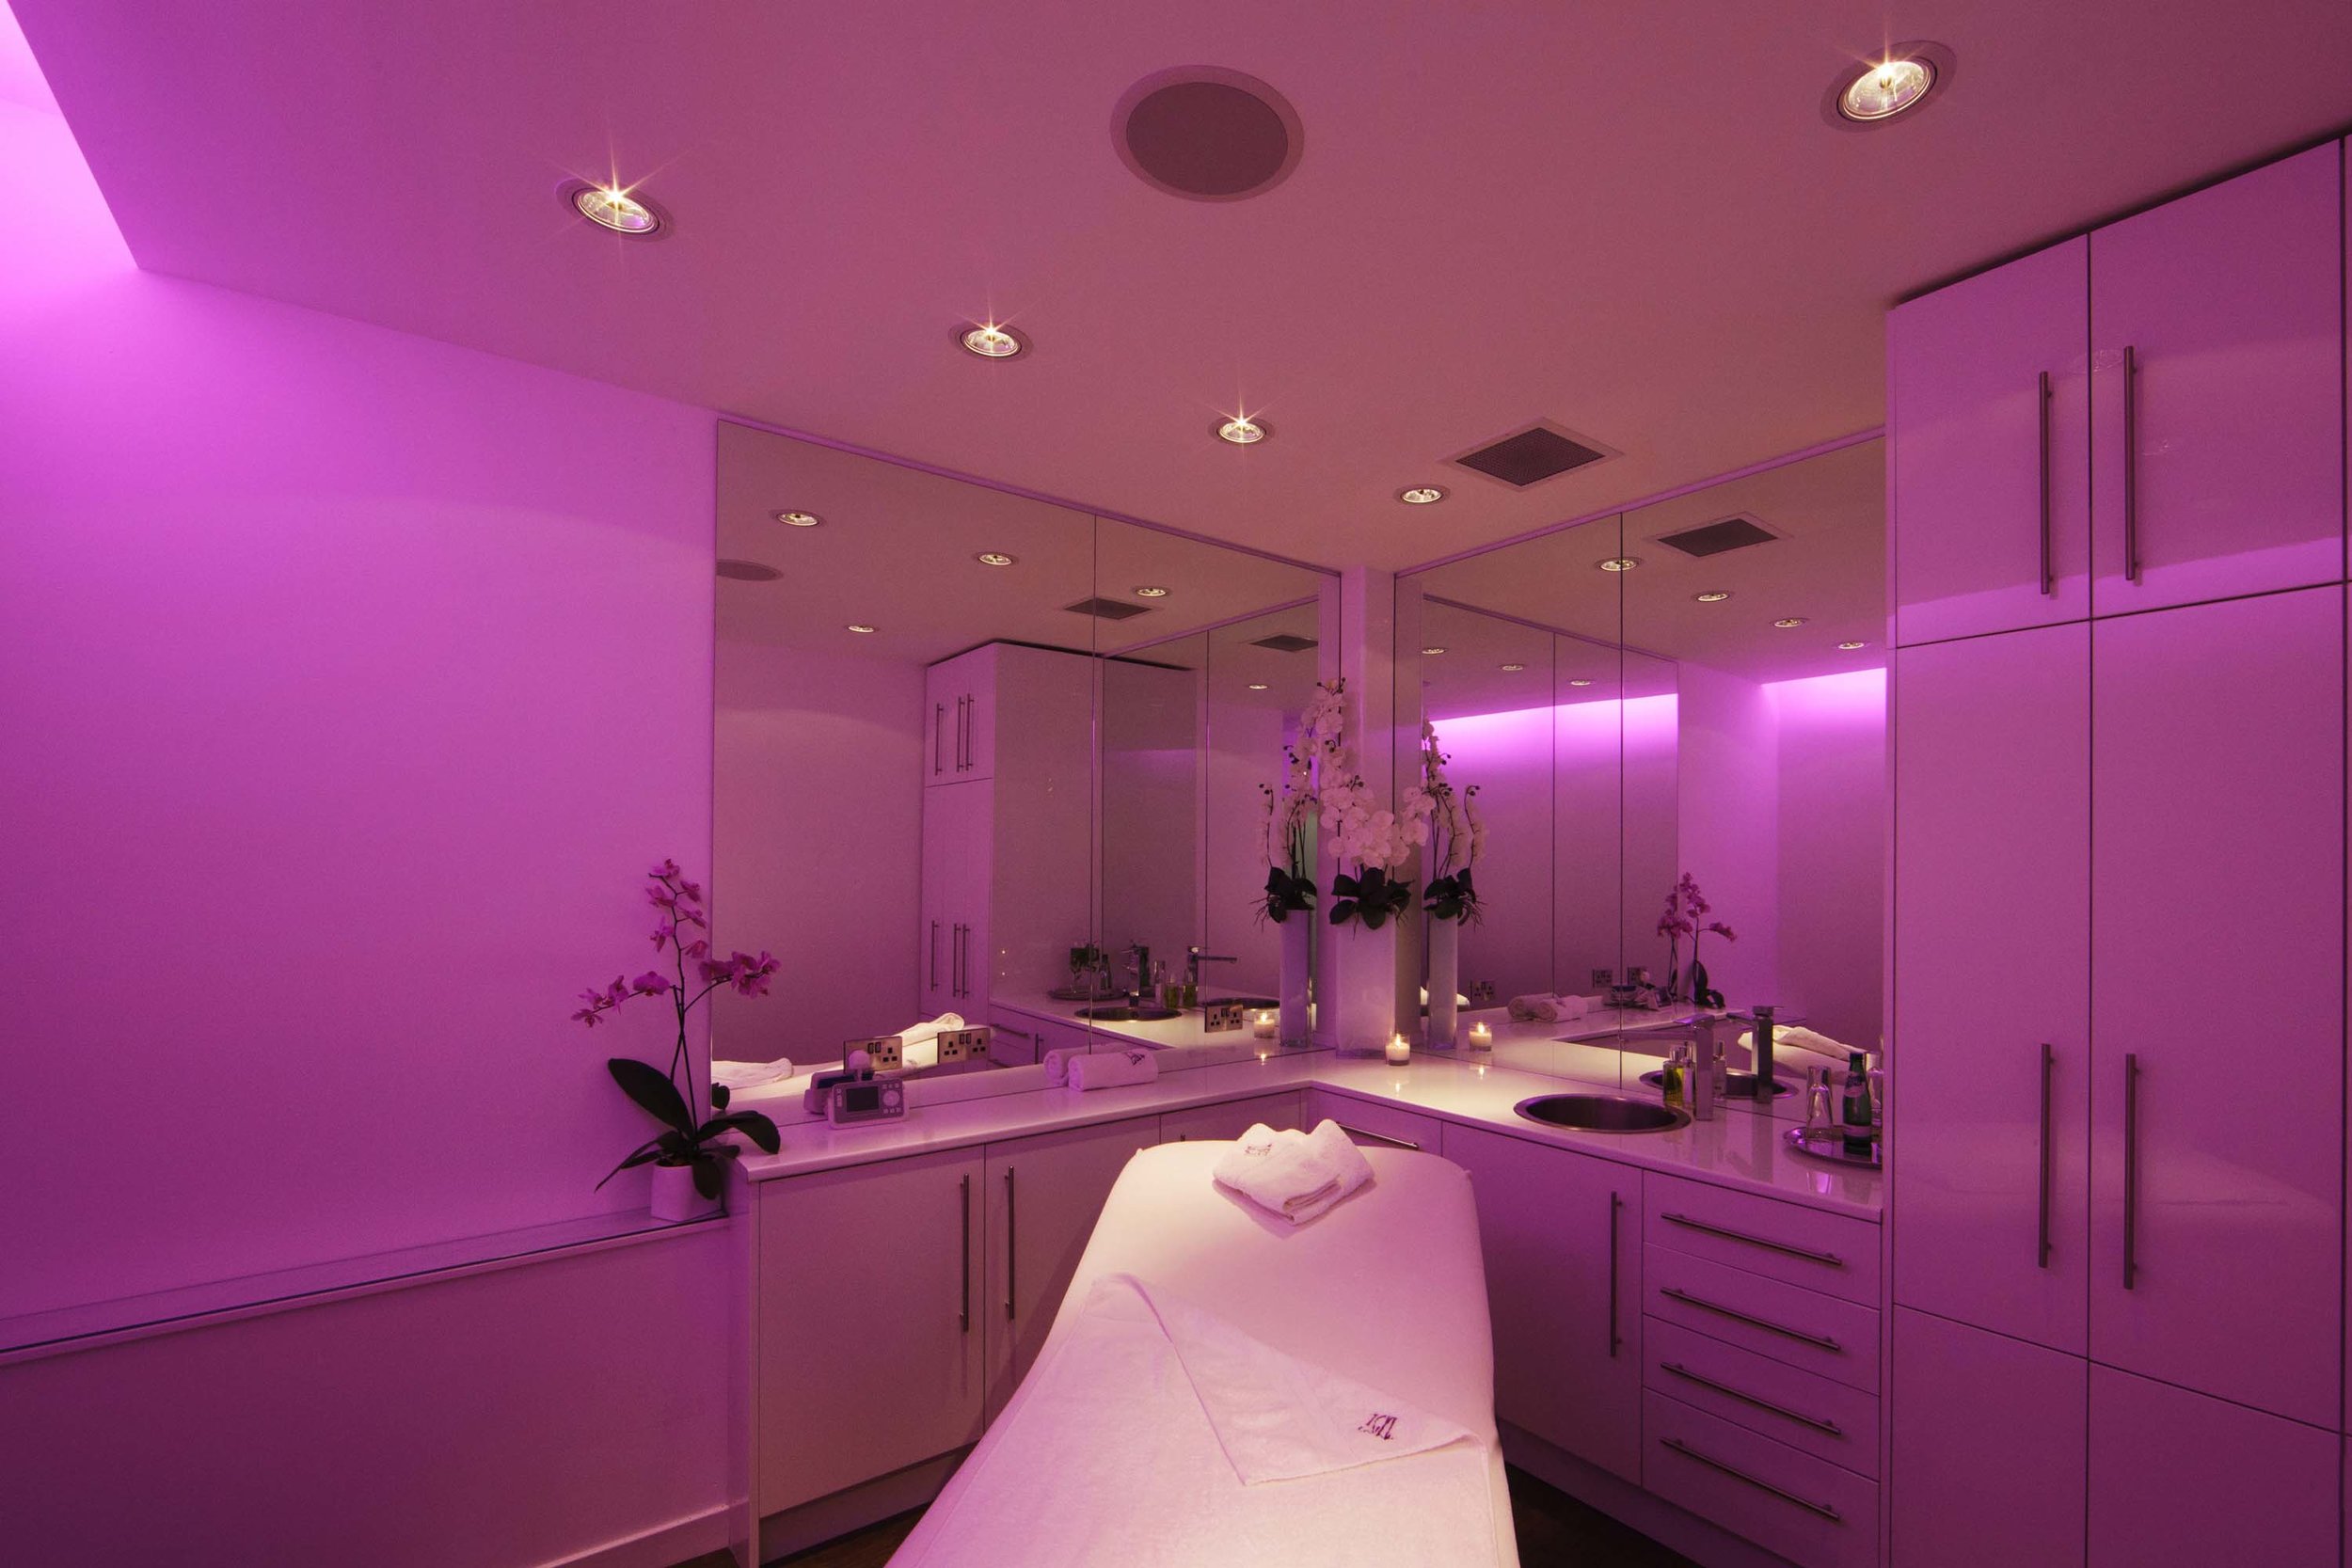 My beautifully pink treatment room